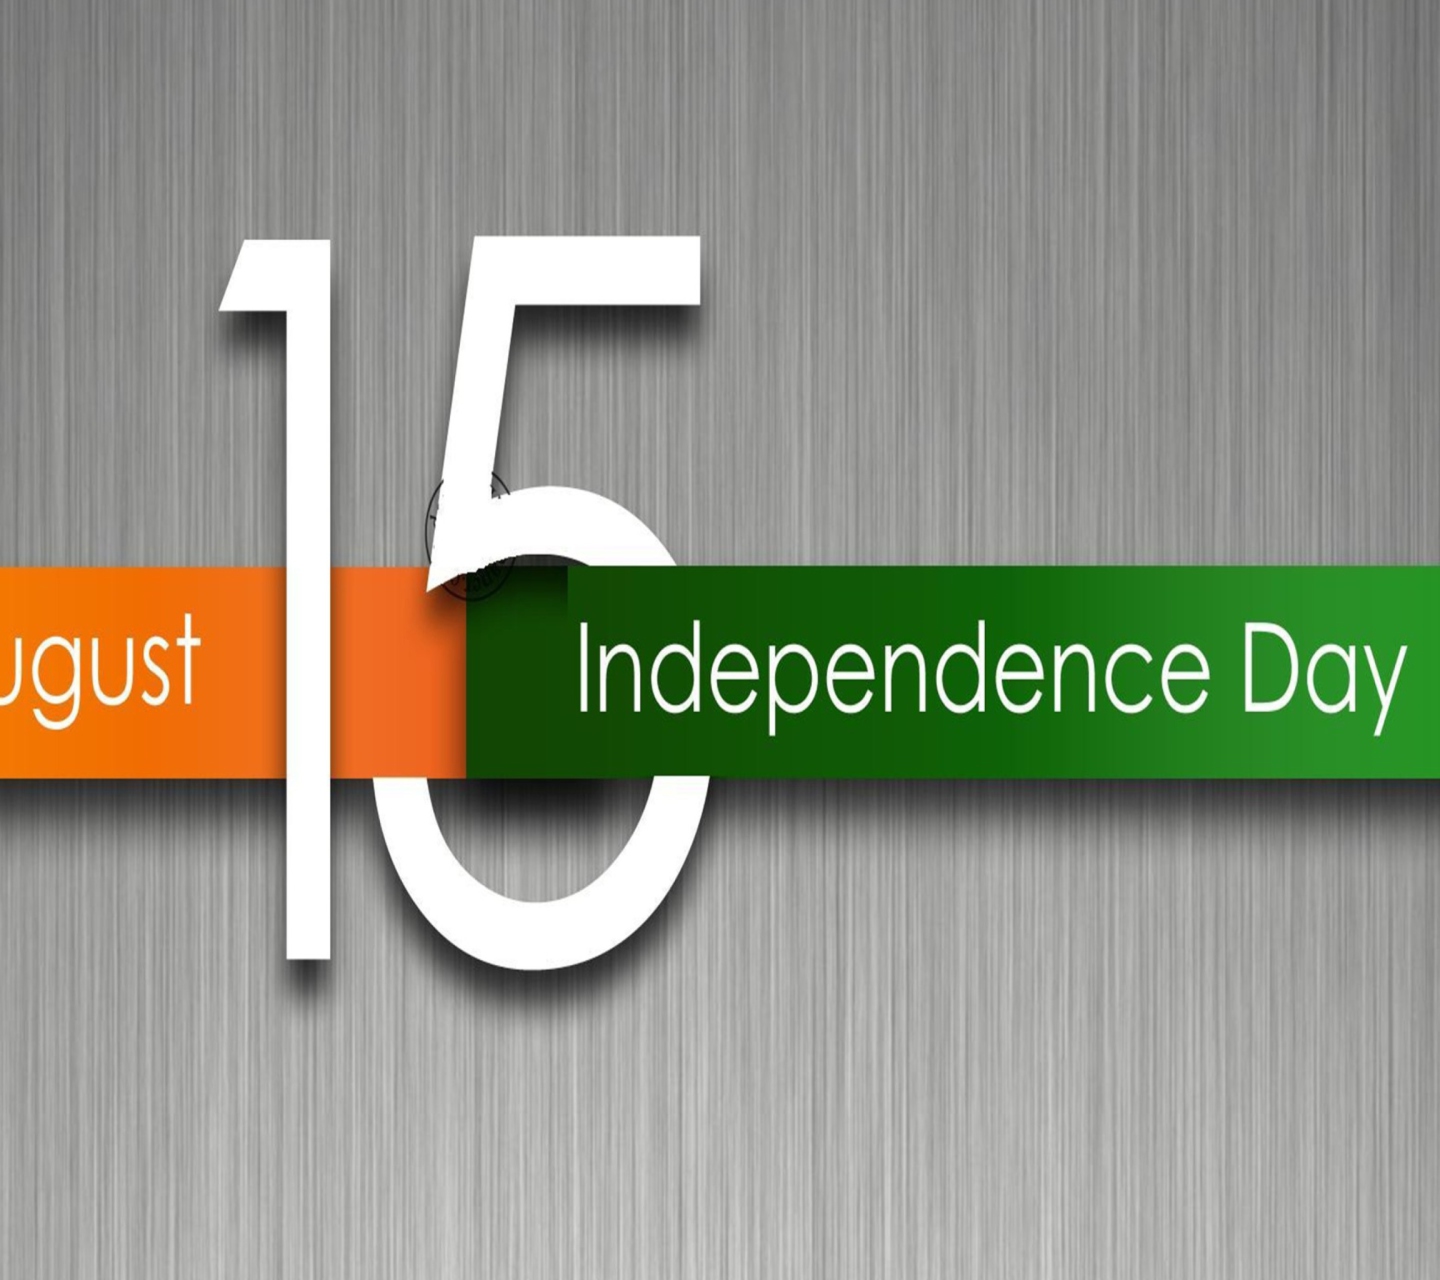 Independence Day in India wallpaper 1440x1280